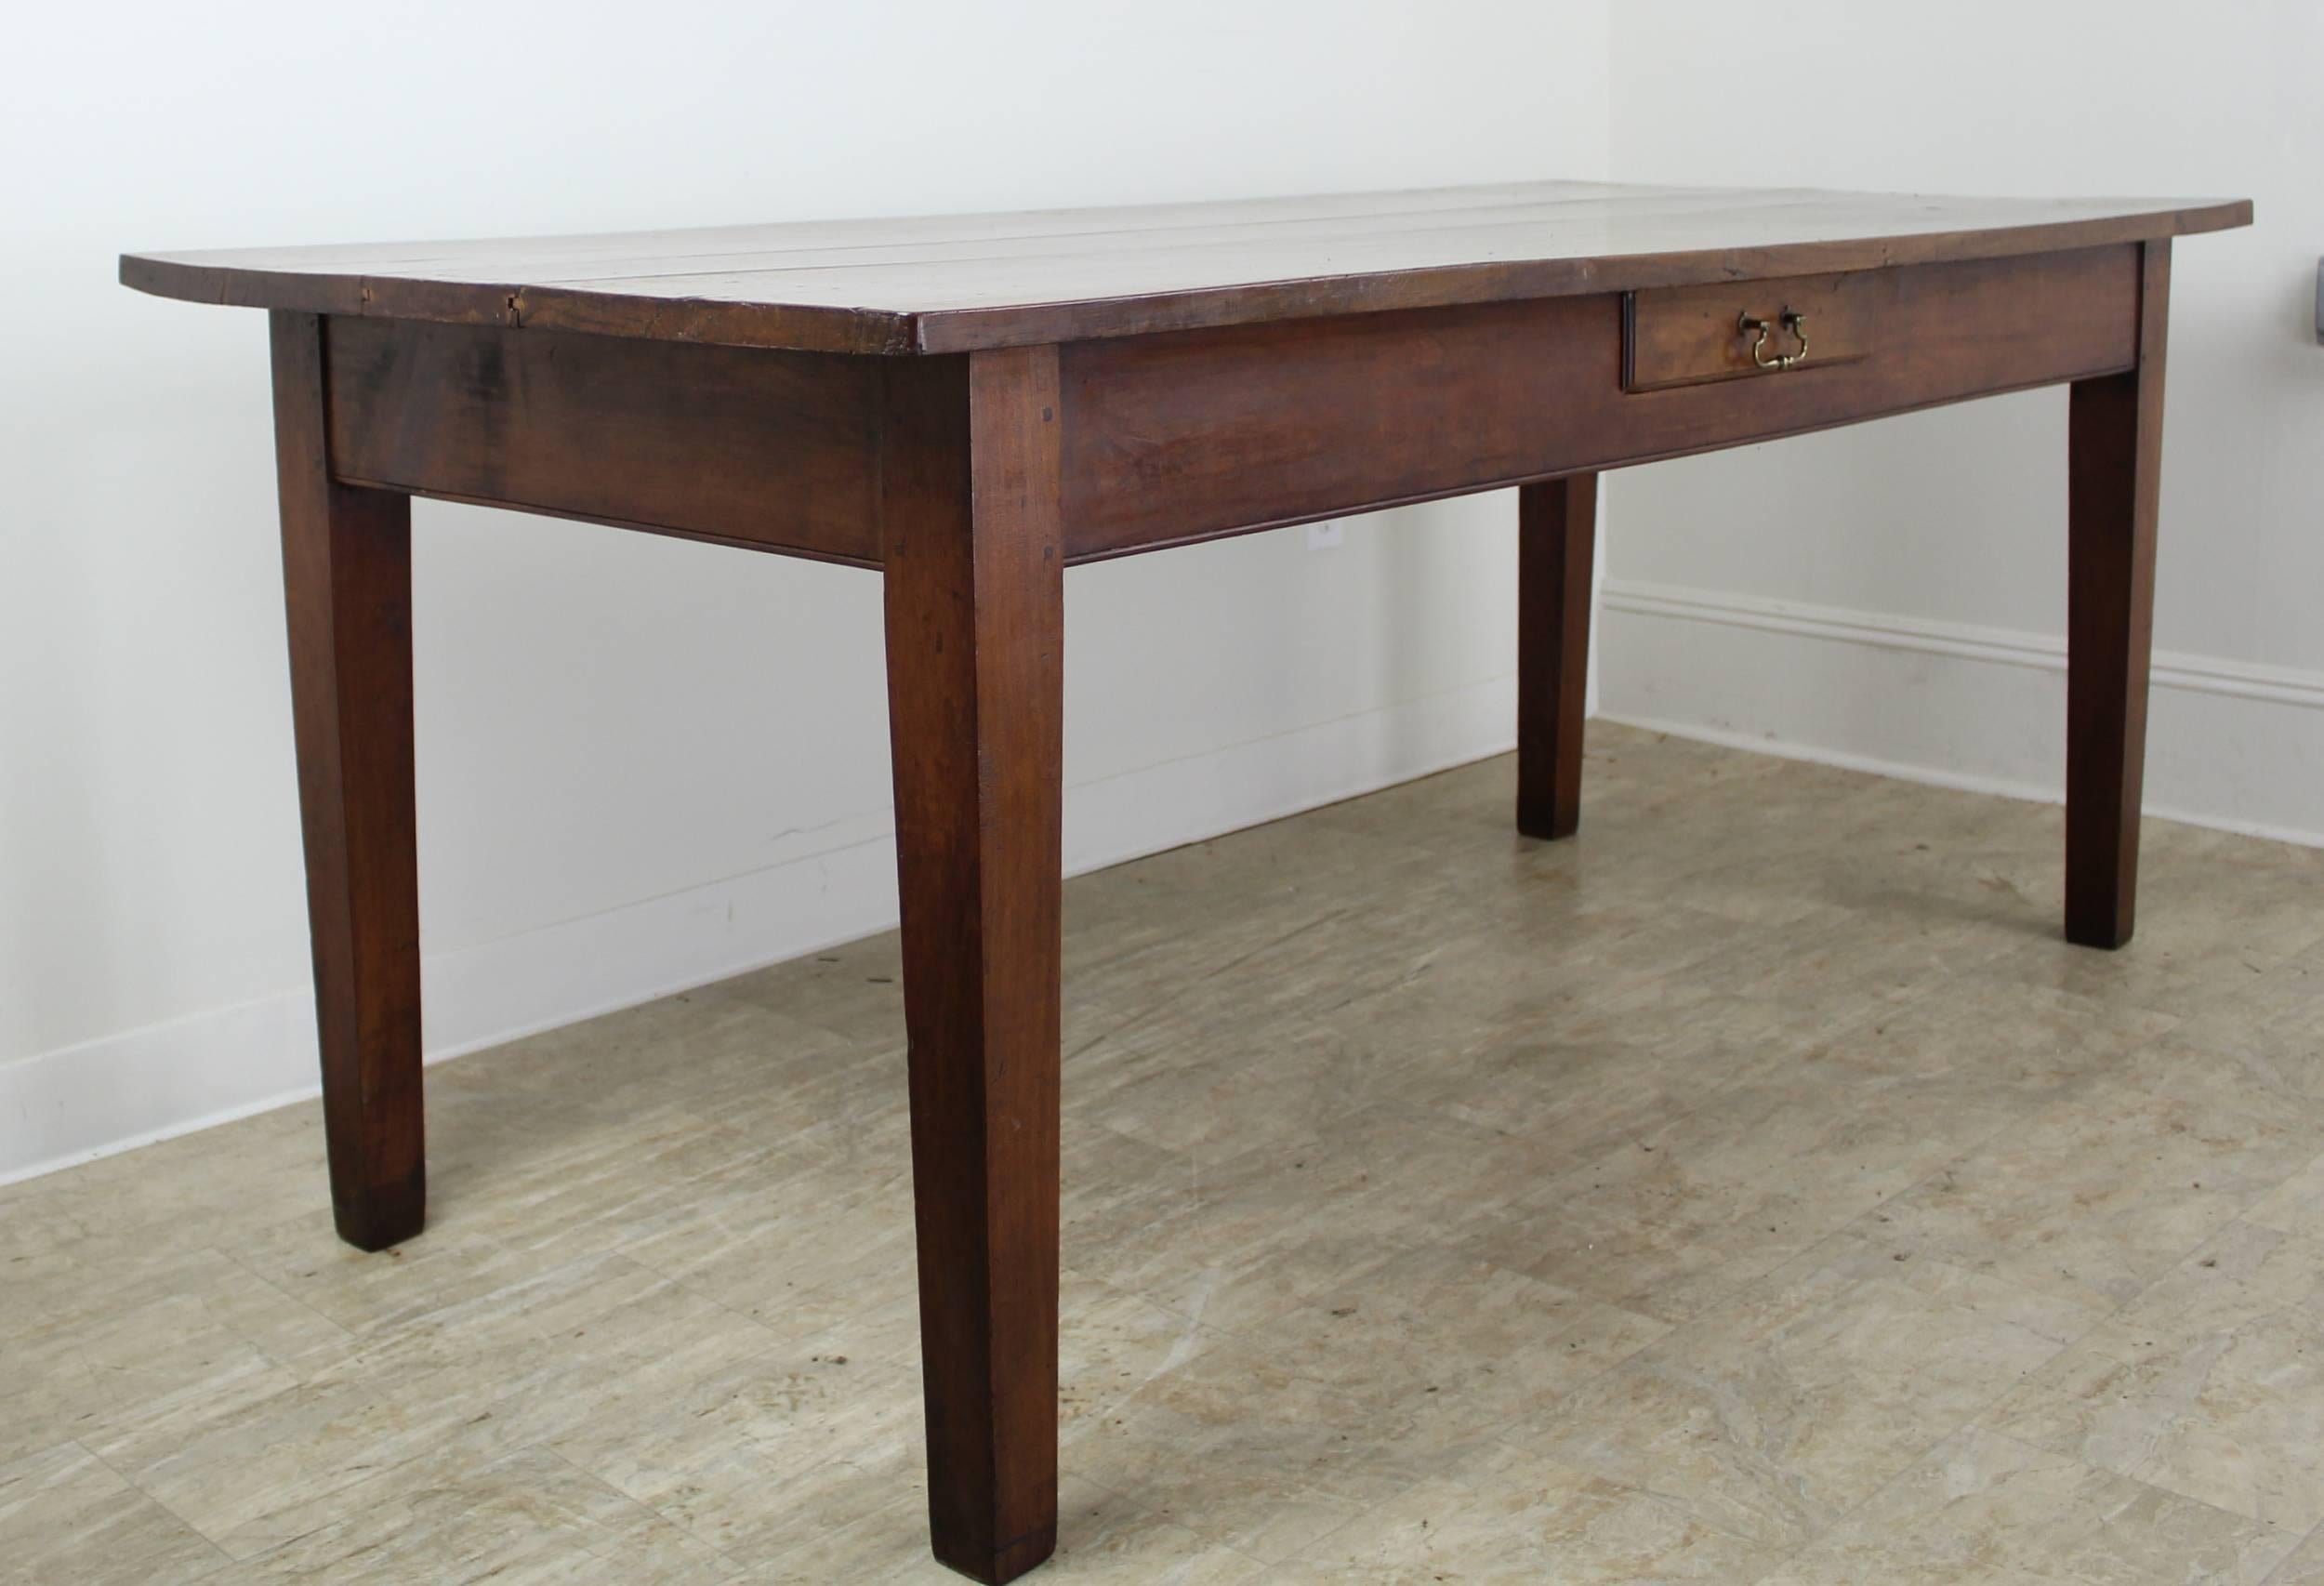 Very handsome dining table with lovely shine and interesting grain. Apron height is 24.25 inches. One nice drawer in the front long apron. Classic French tapered, slender legs. Lovely warm color and patina. Distance between the legs is 62.5 inches.